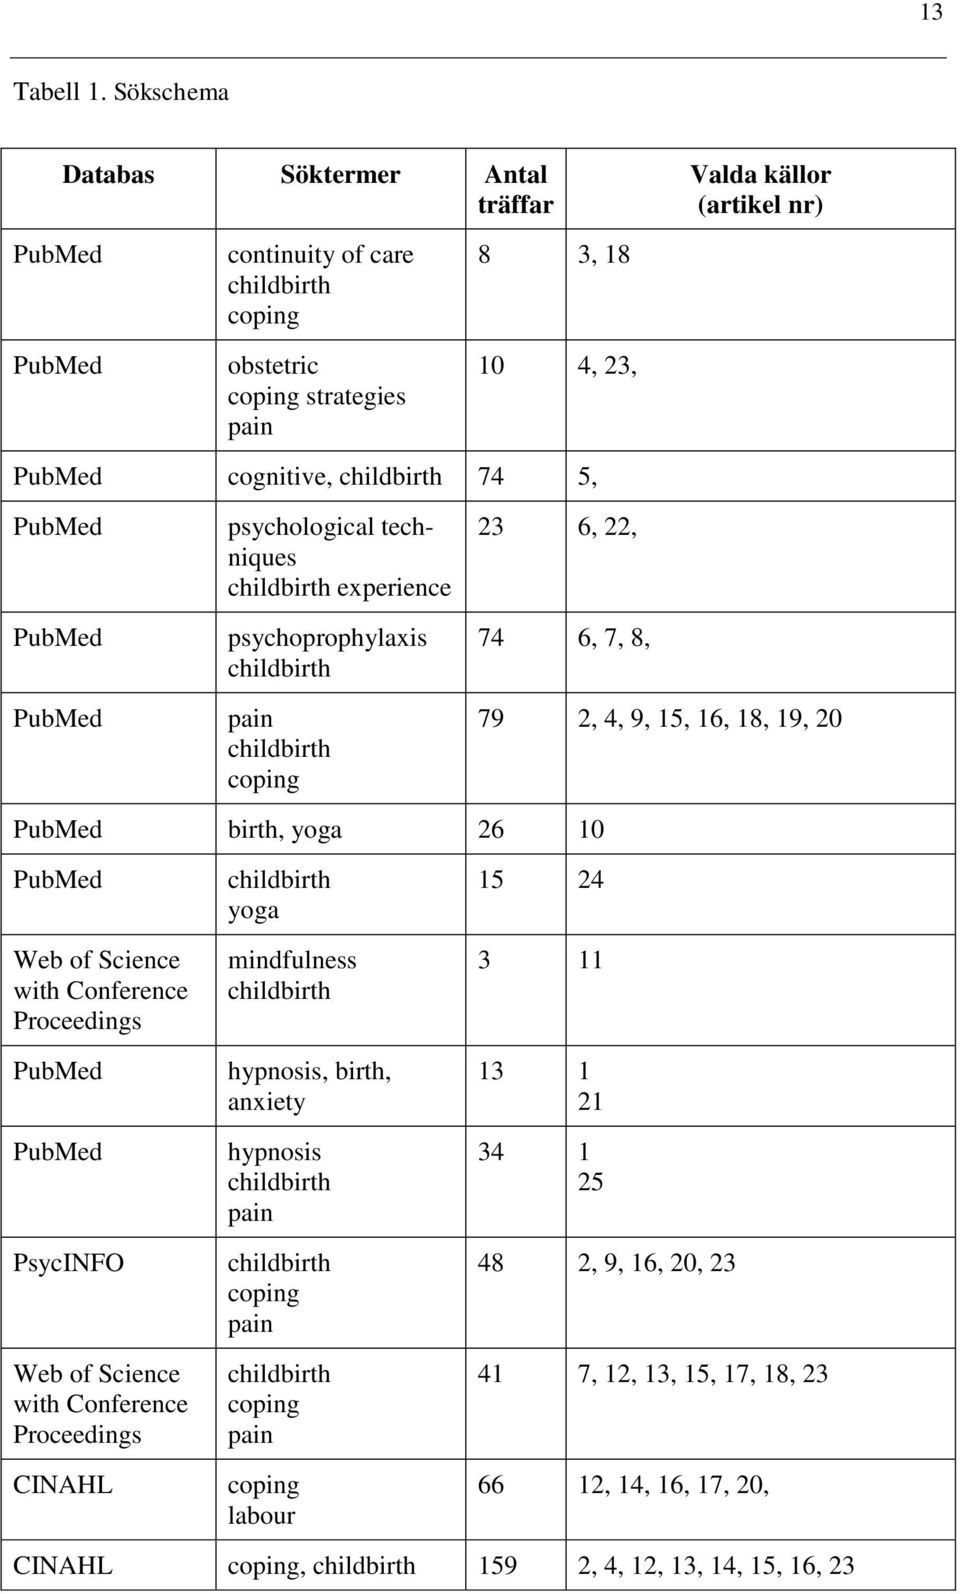 74 5, PubMed PubMed PubMed psychological techniques childbirth experience psychoprophylaxis childbirth pain childbirth coping 23 6, 22, 74 6, 7, 8, 79 2, 4, 9, 15, 16, 18, 19, 20 PubMed birth, yoga